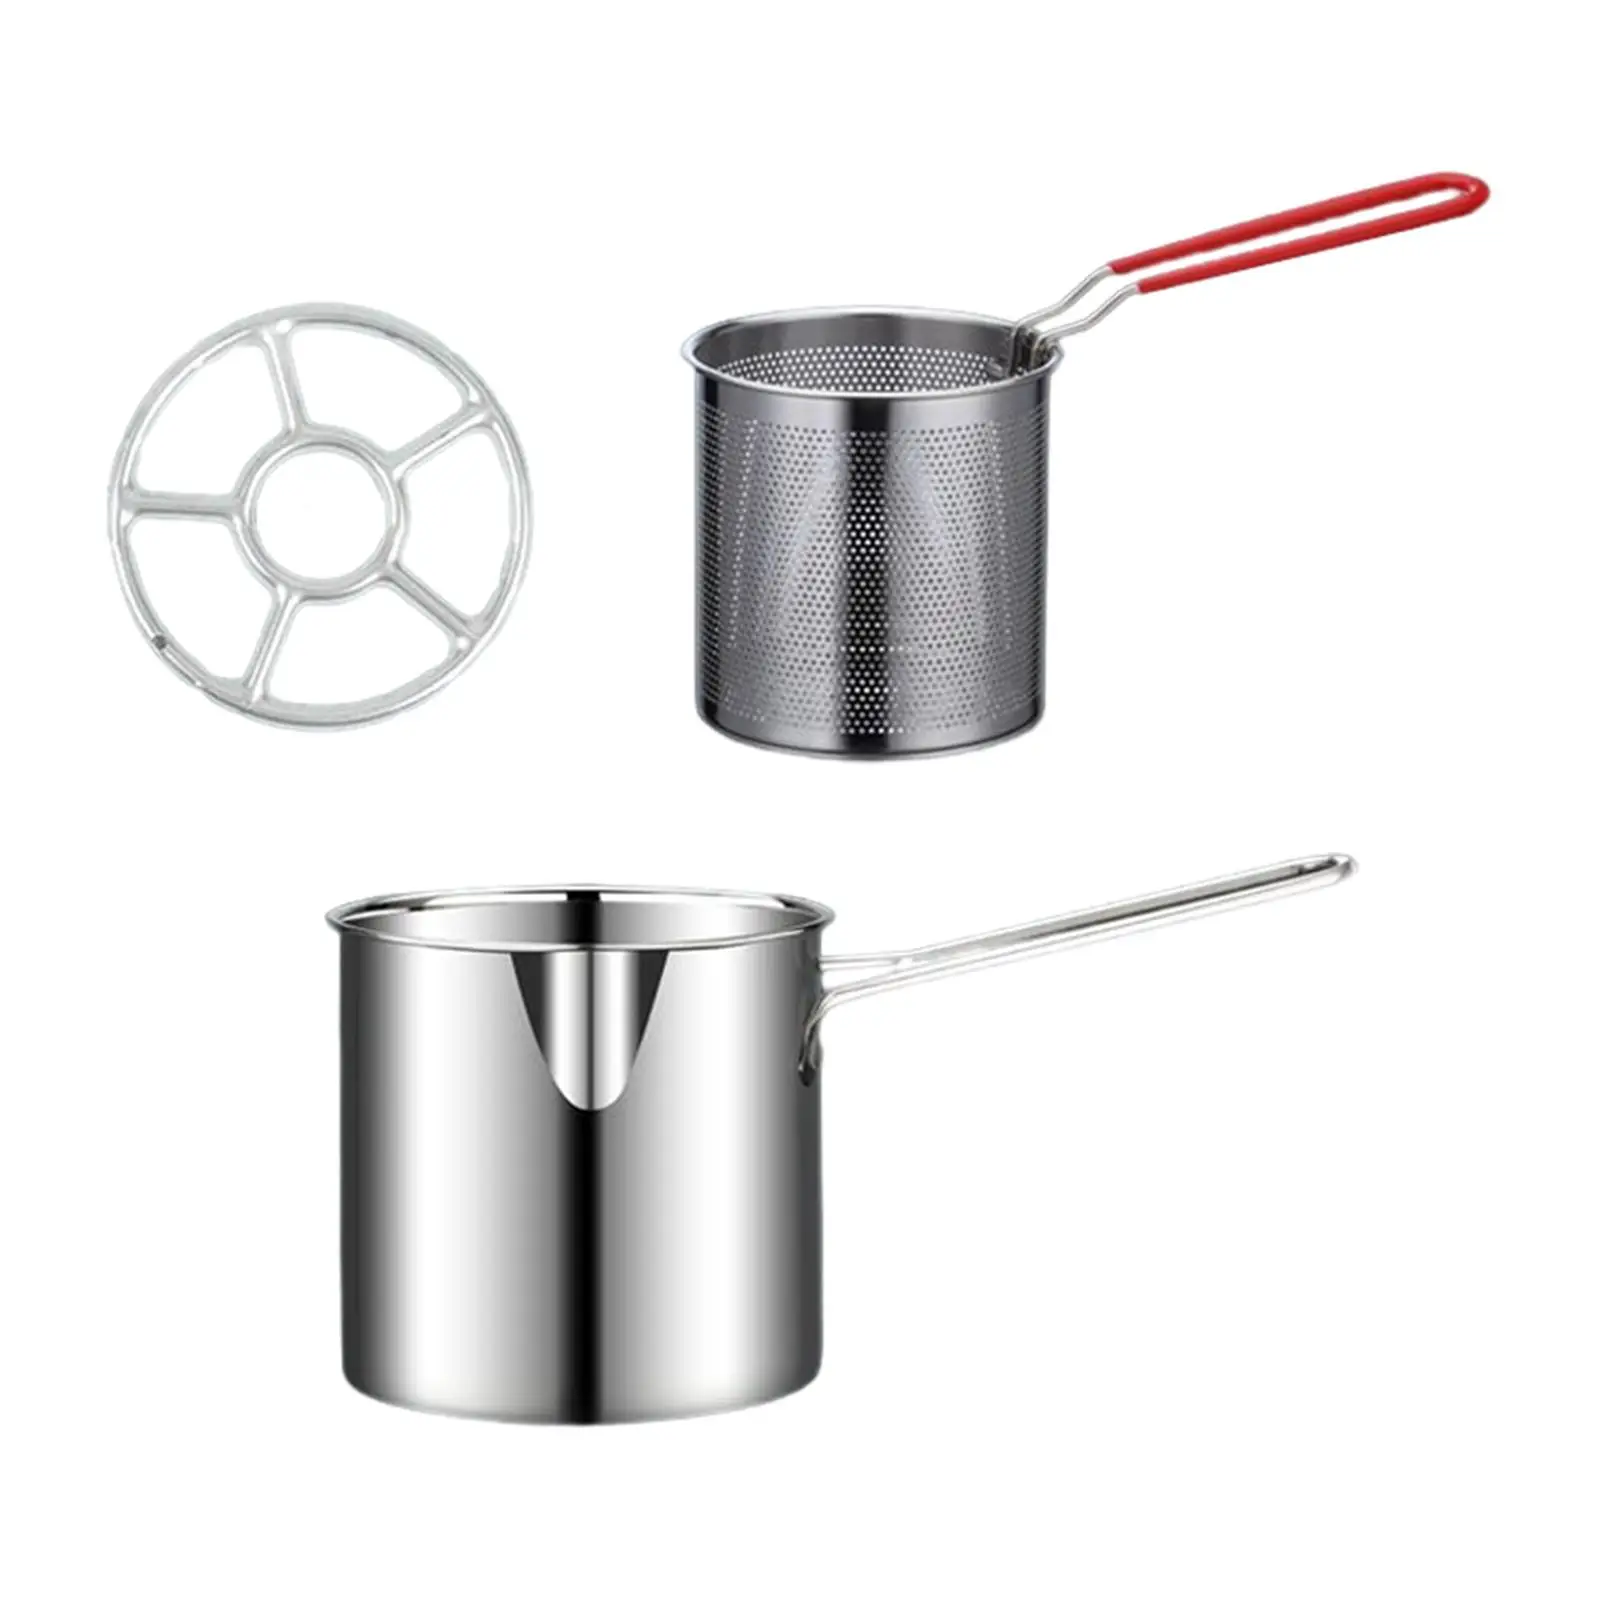 Deep Frying Pot Stainless Steel Kitchen Milk Pot With Strainer Cooking Tools